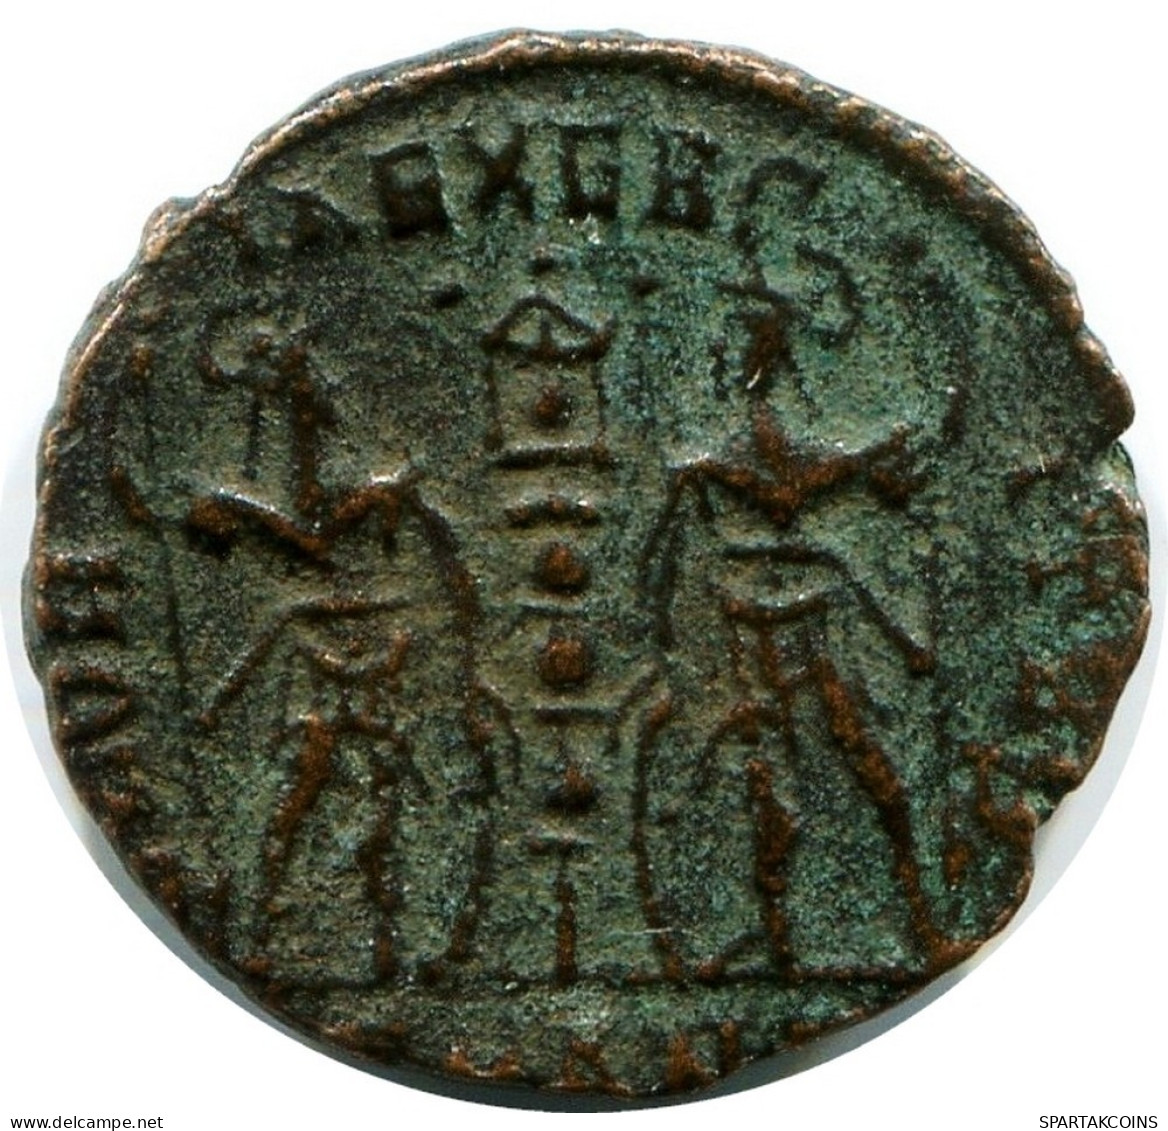 RÖMISCHE Münze MINTED IN ANTIOCH FROM THE ROYAL ONTARIO MUSEUM #ANC11303.14.D.A - The Christian Empire (307 AD Tot 363 AD)